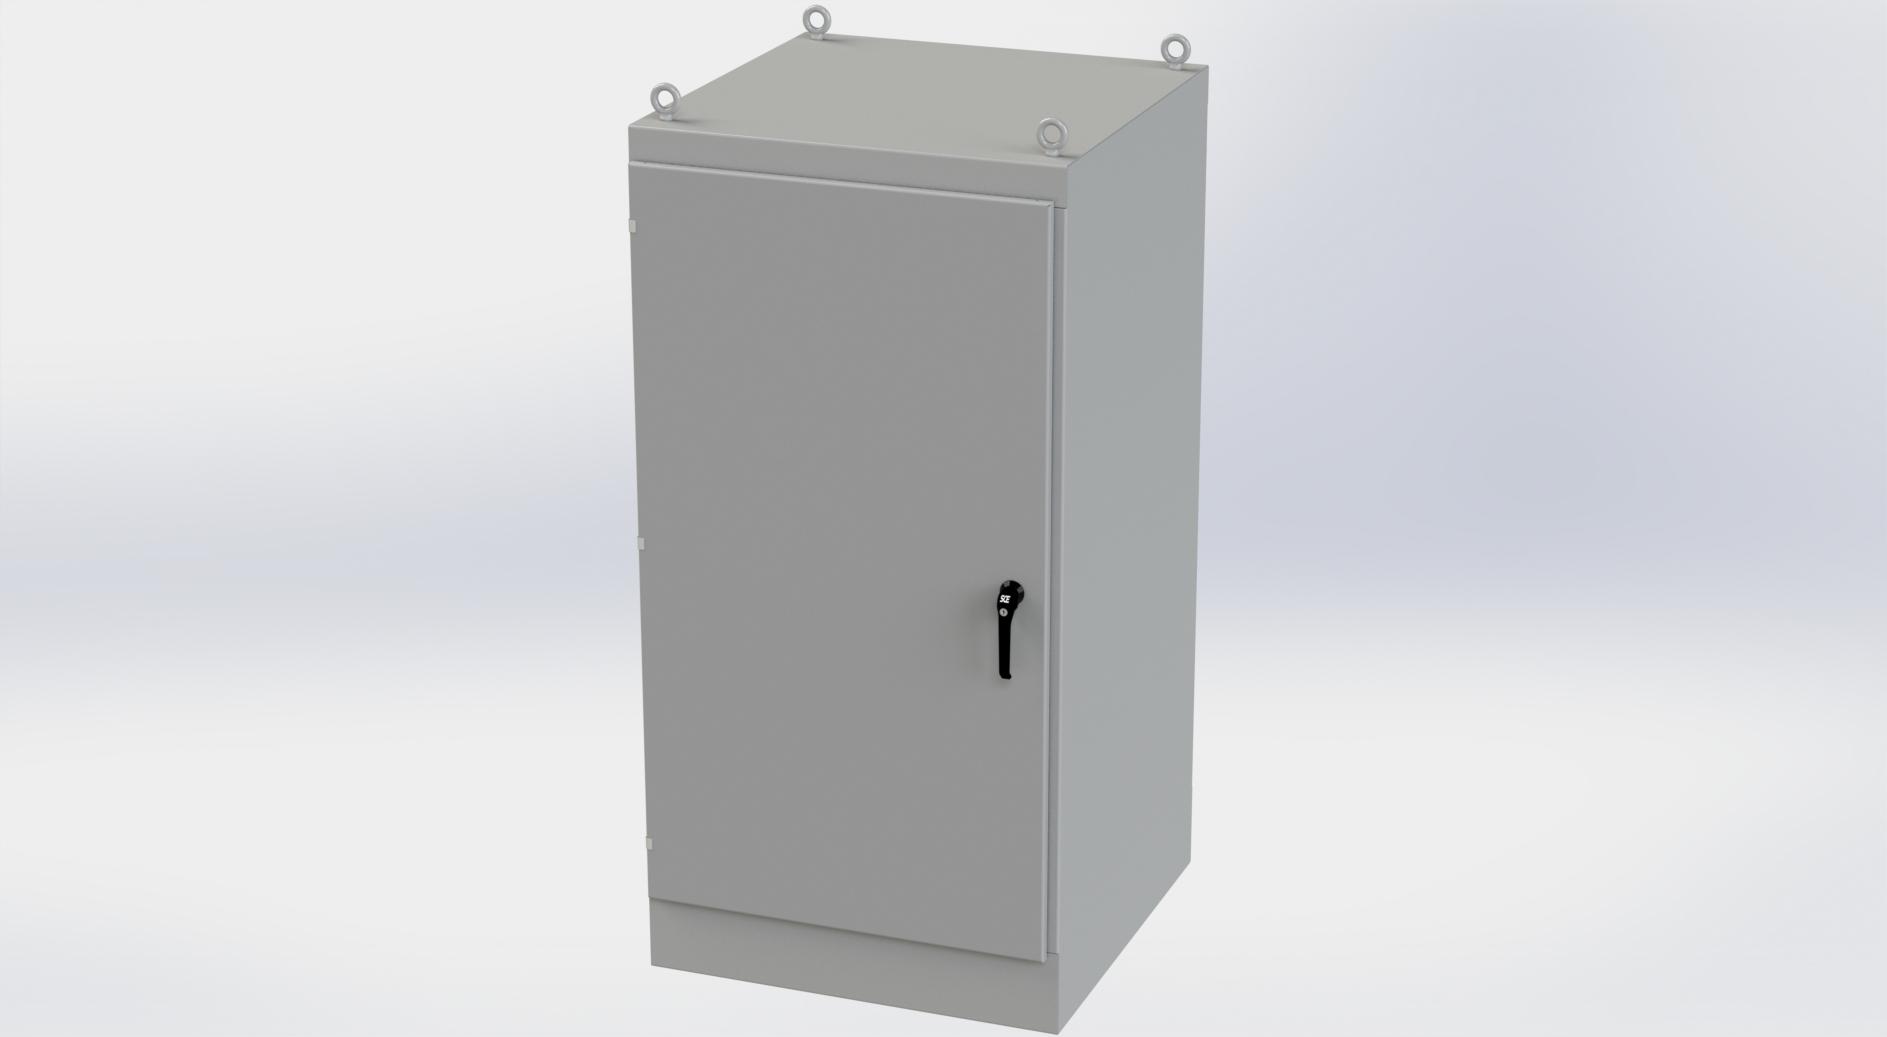 Saginaw Control SCE-723636FSDA FSDA Enclosure, Height:72.00", Width:36.00", Depth:36.00", ANSI-61 gray powder coat inside and out. Optional sub-panels are powder coated white.